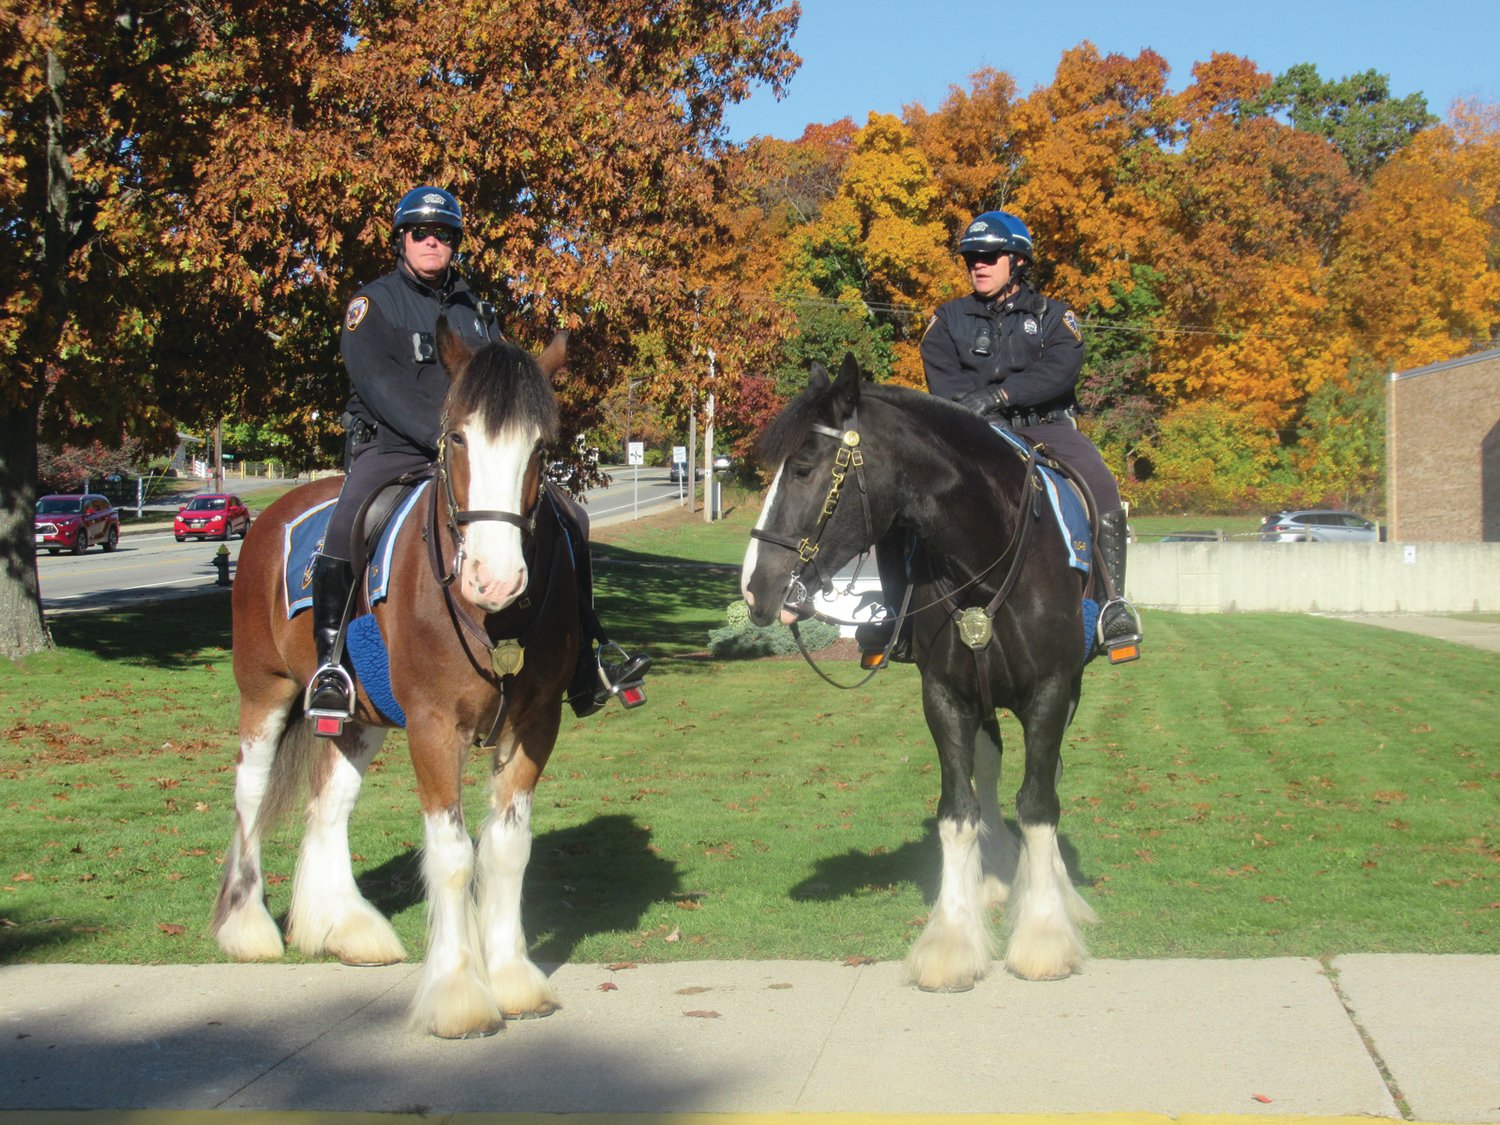 MIGHTY MOUNTIES: The Providence Police Mounted Command enhanced last Saturday’s Homecoming and afforded many people photo opportunities.